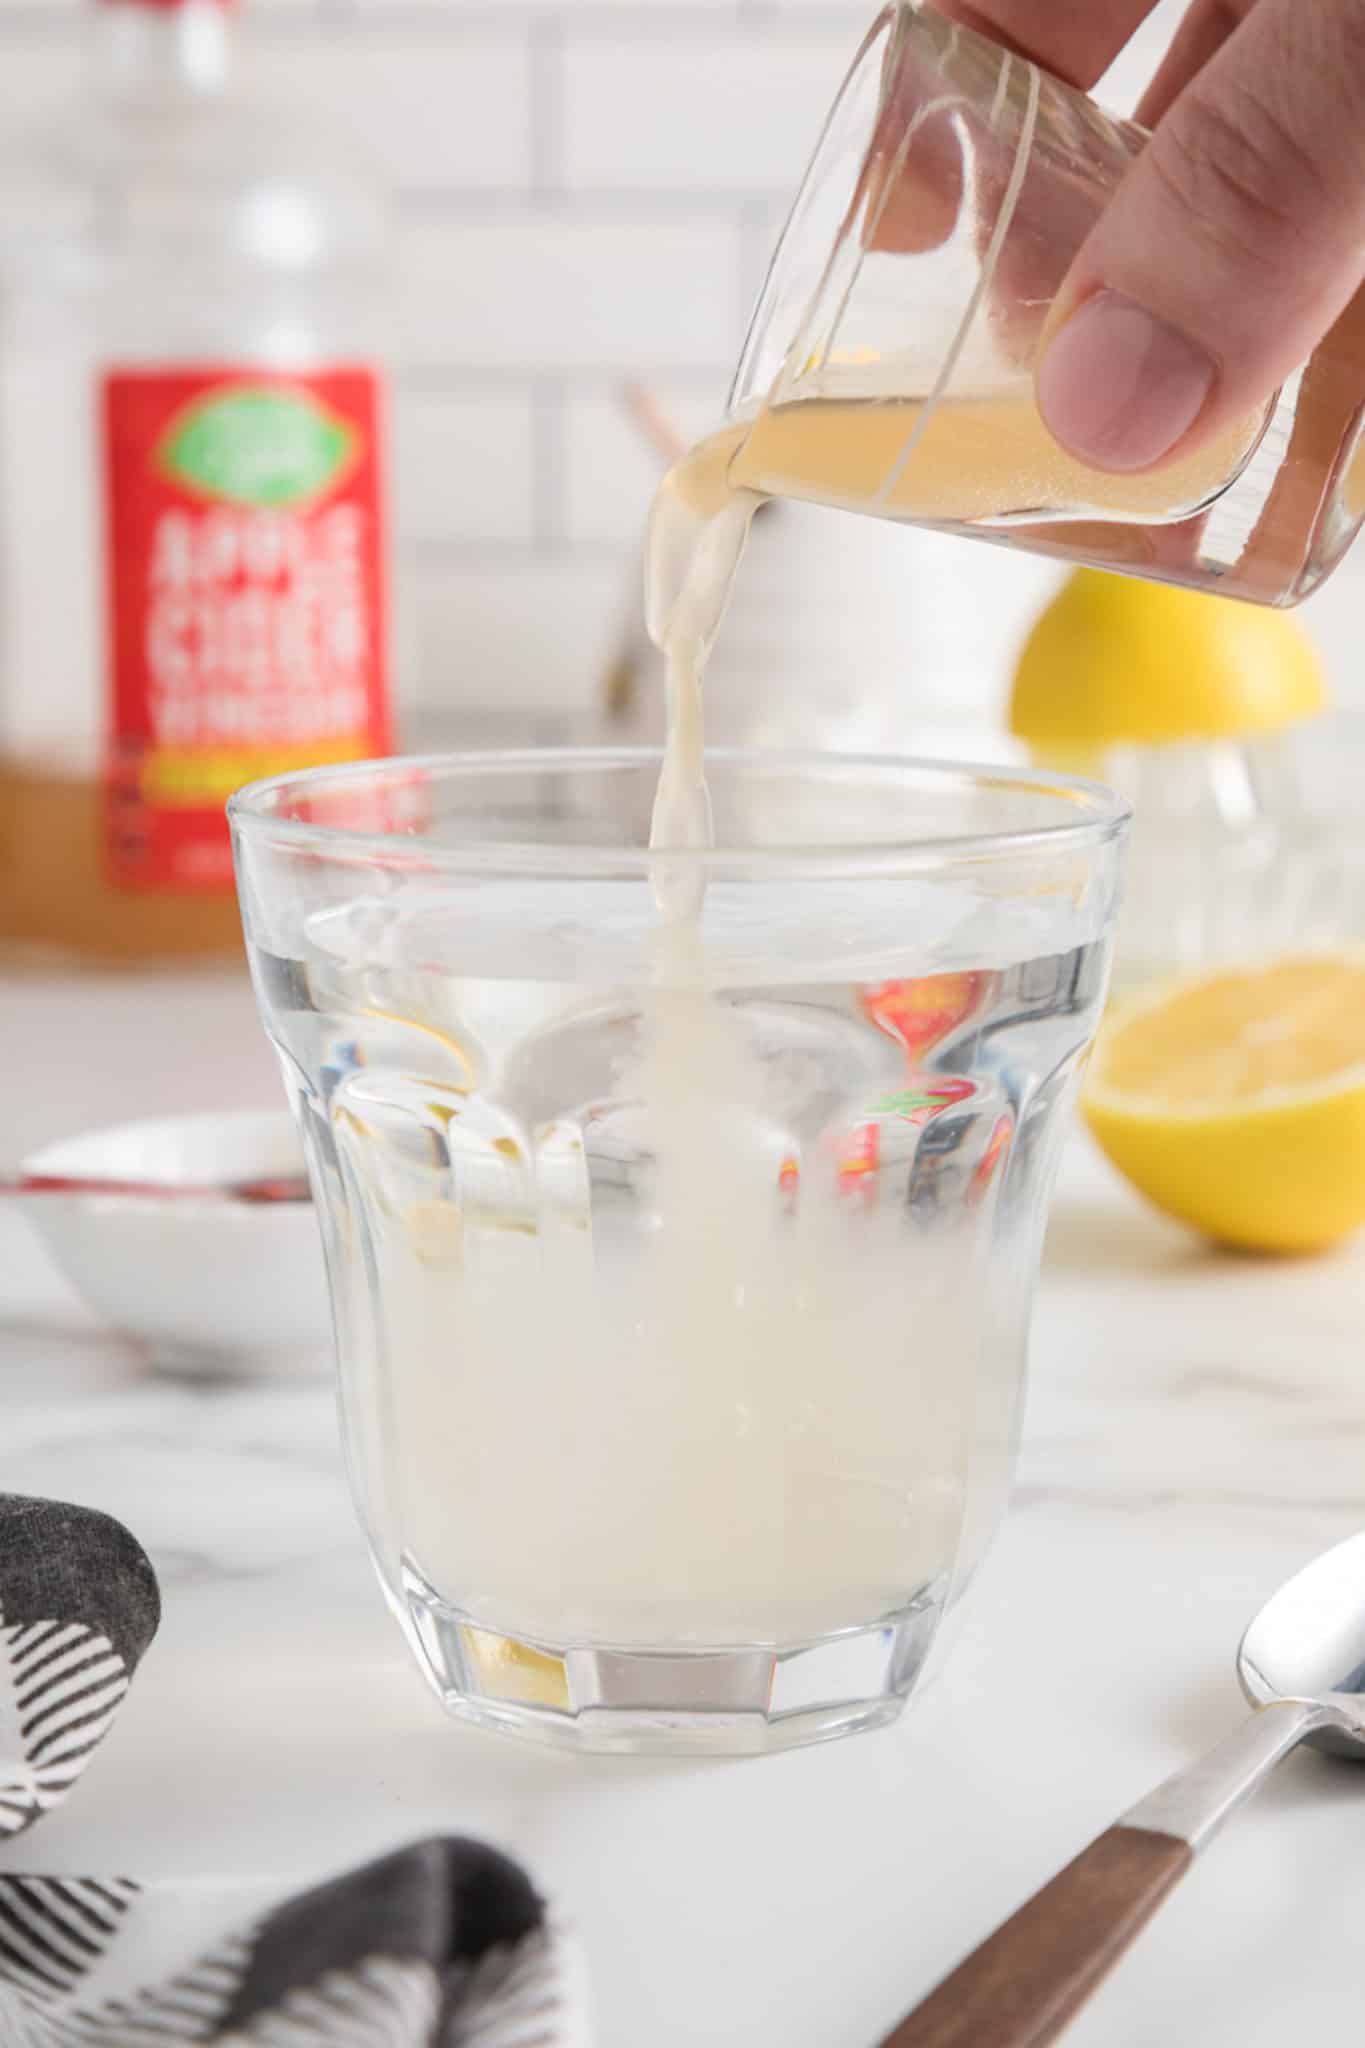 Pouring a shot of apple cider vinegar into a glass of water.